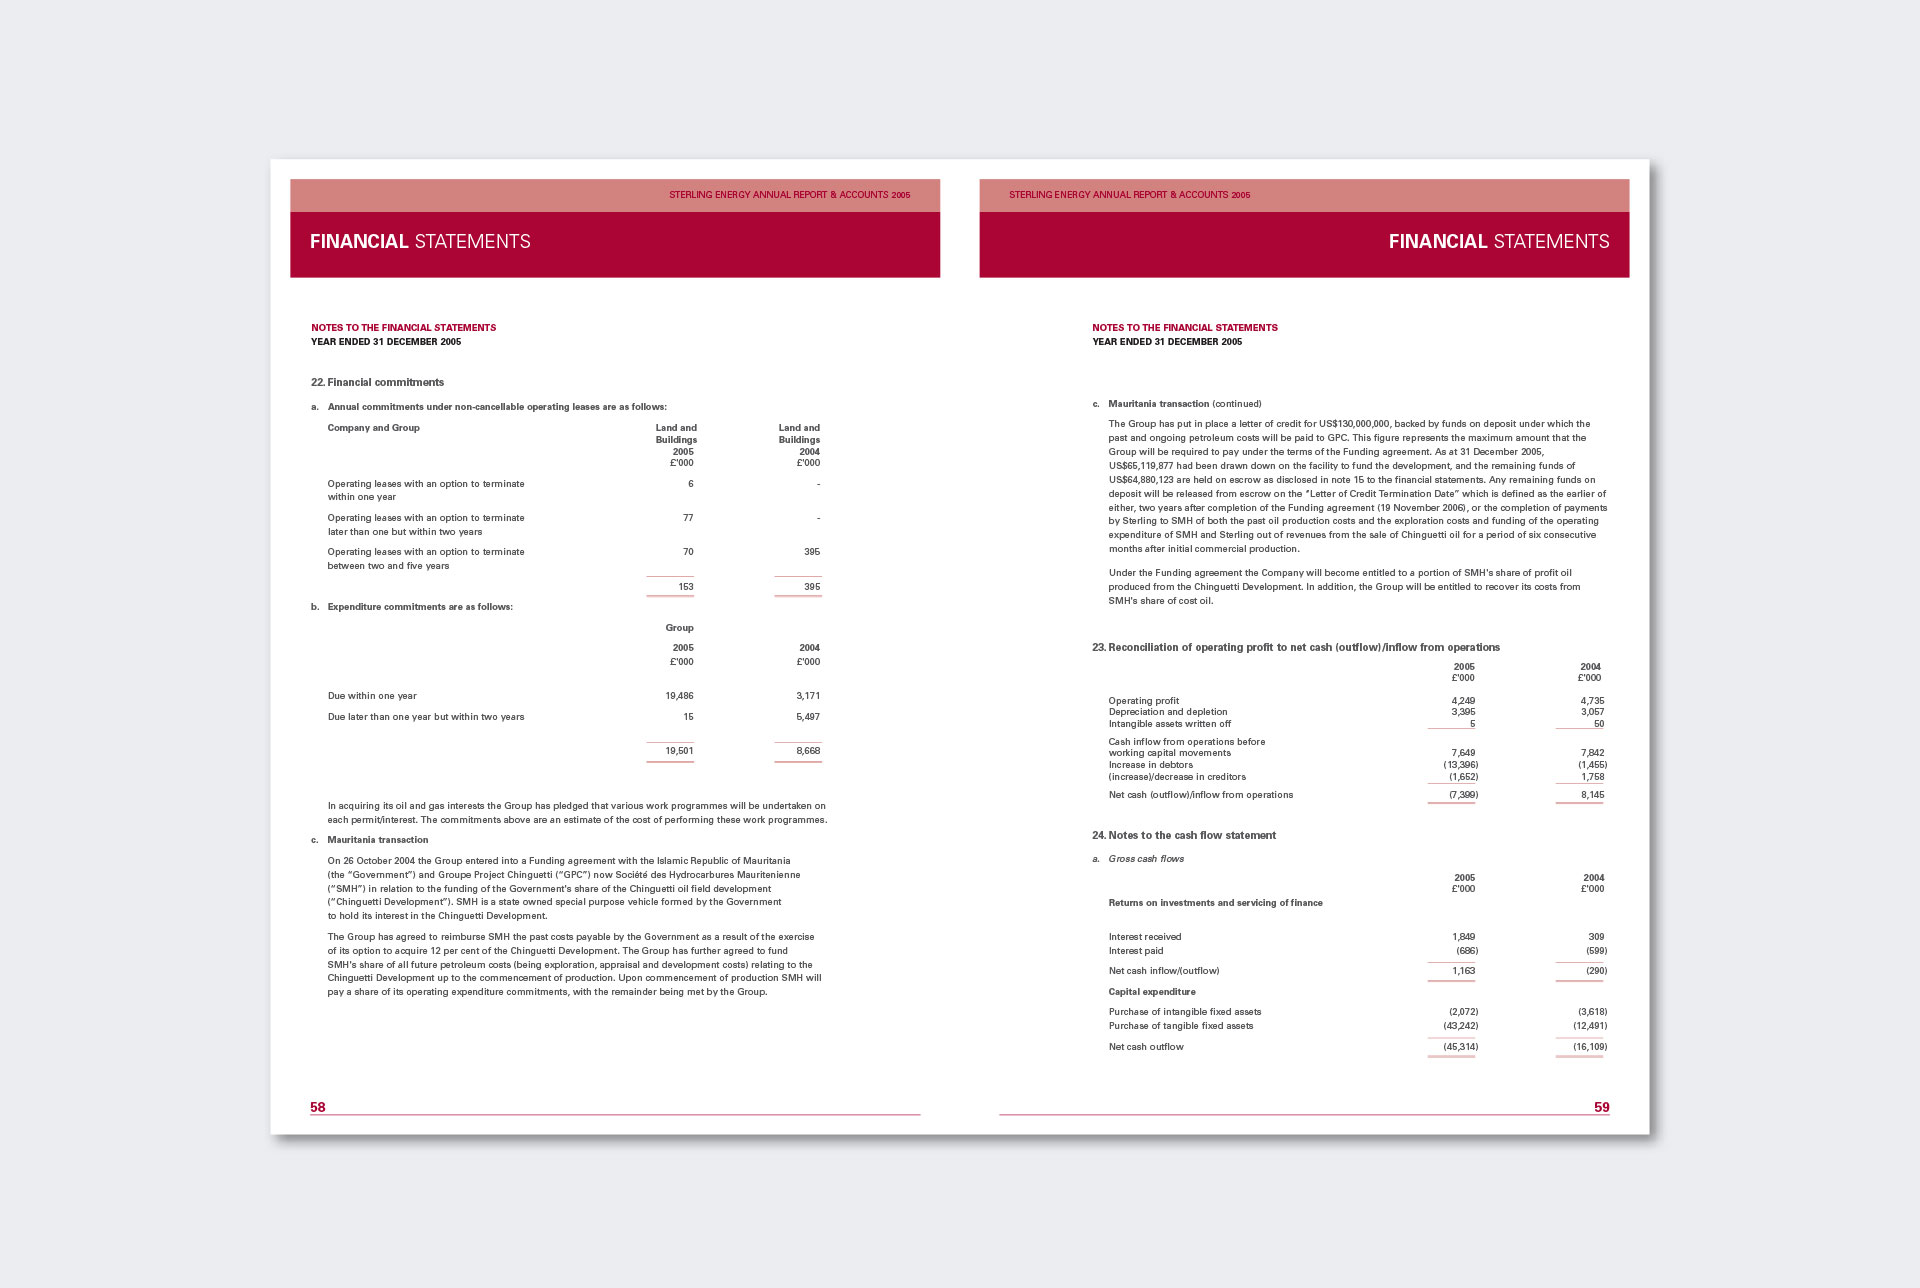 sterling-energy-annual-report-financial-pages.jpg